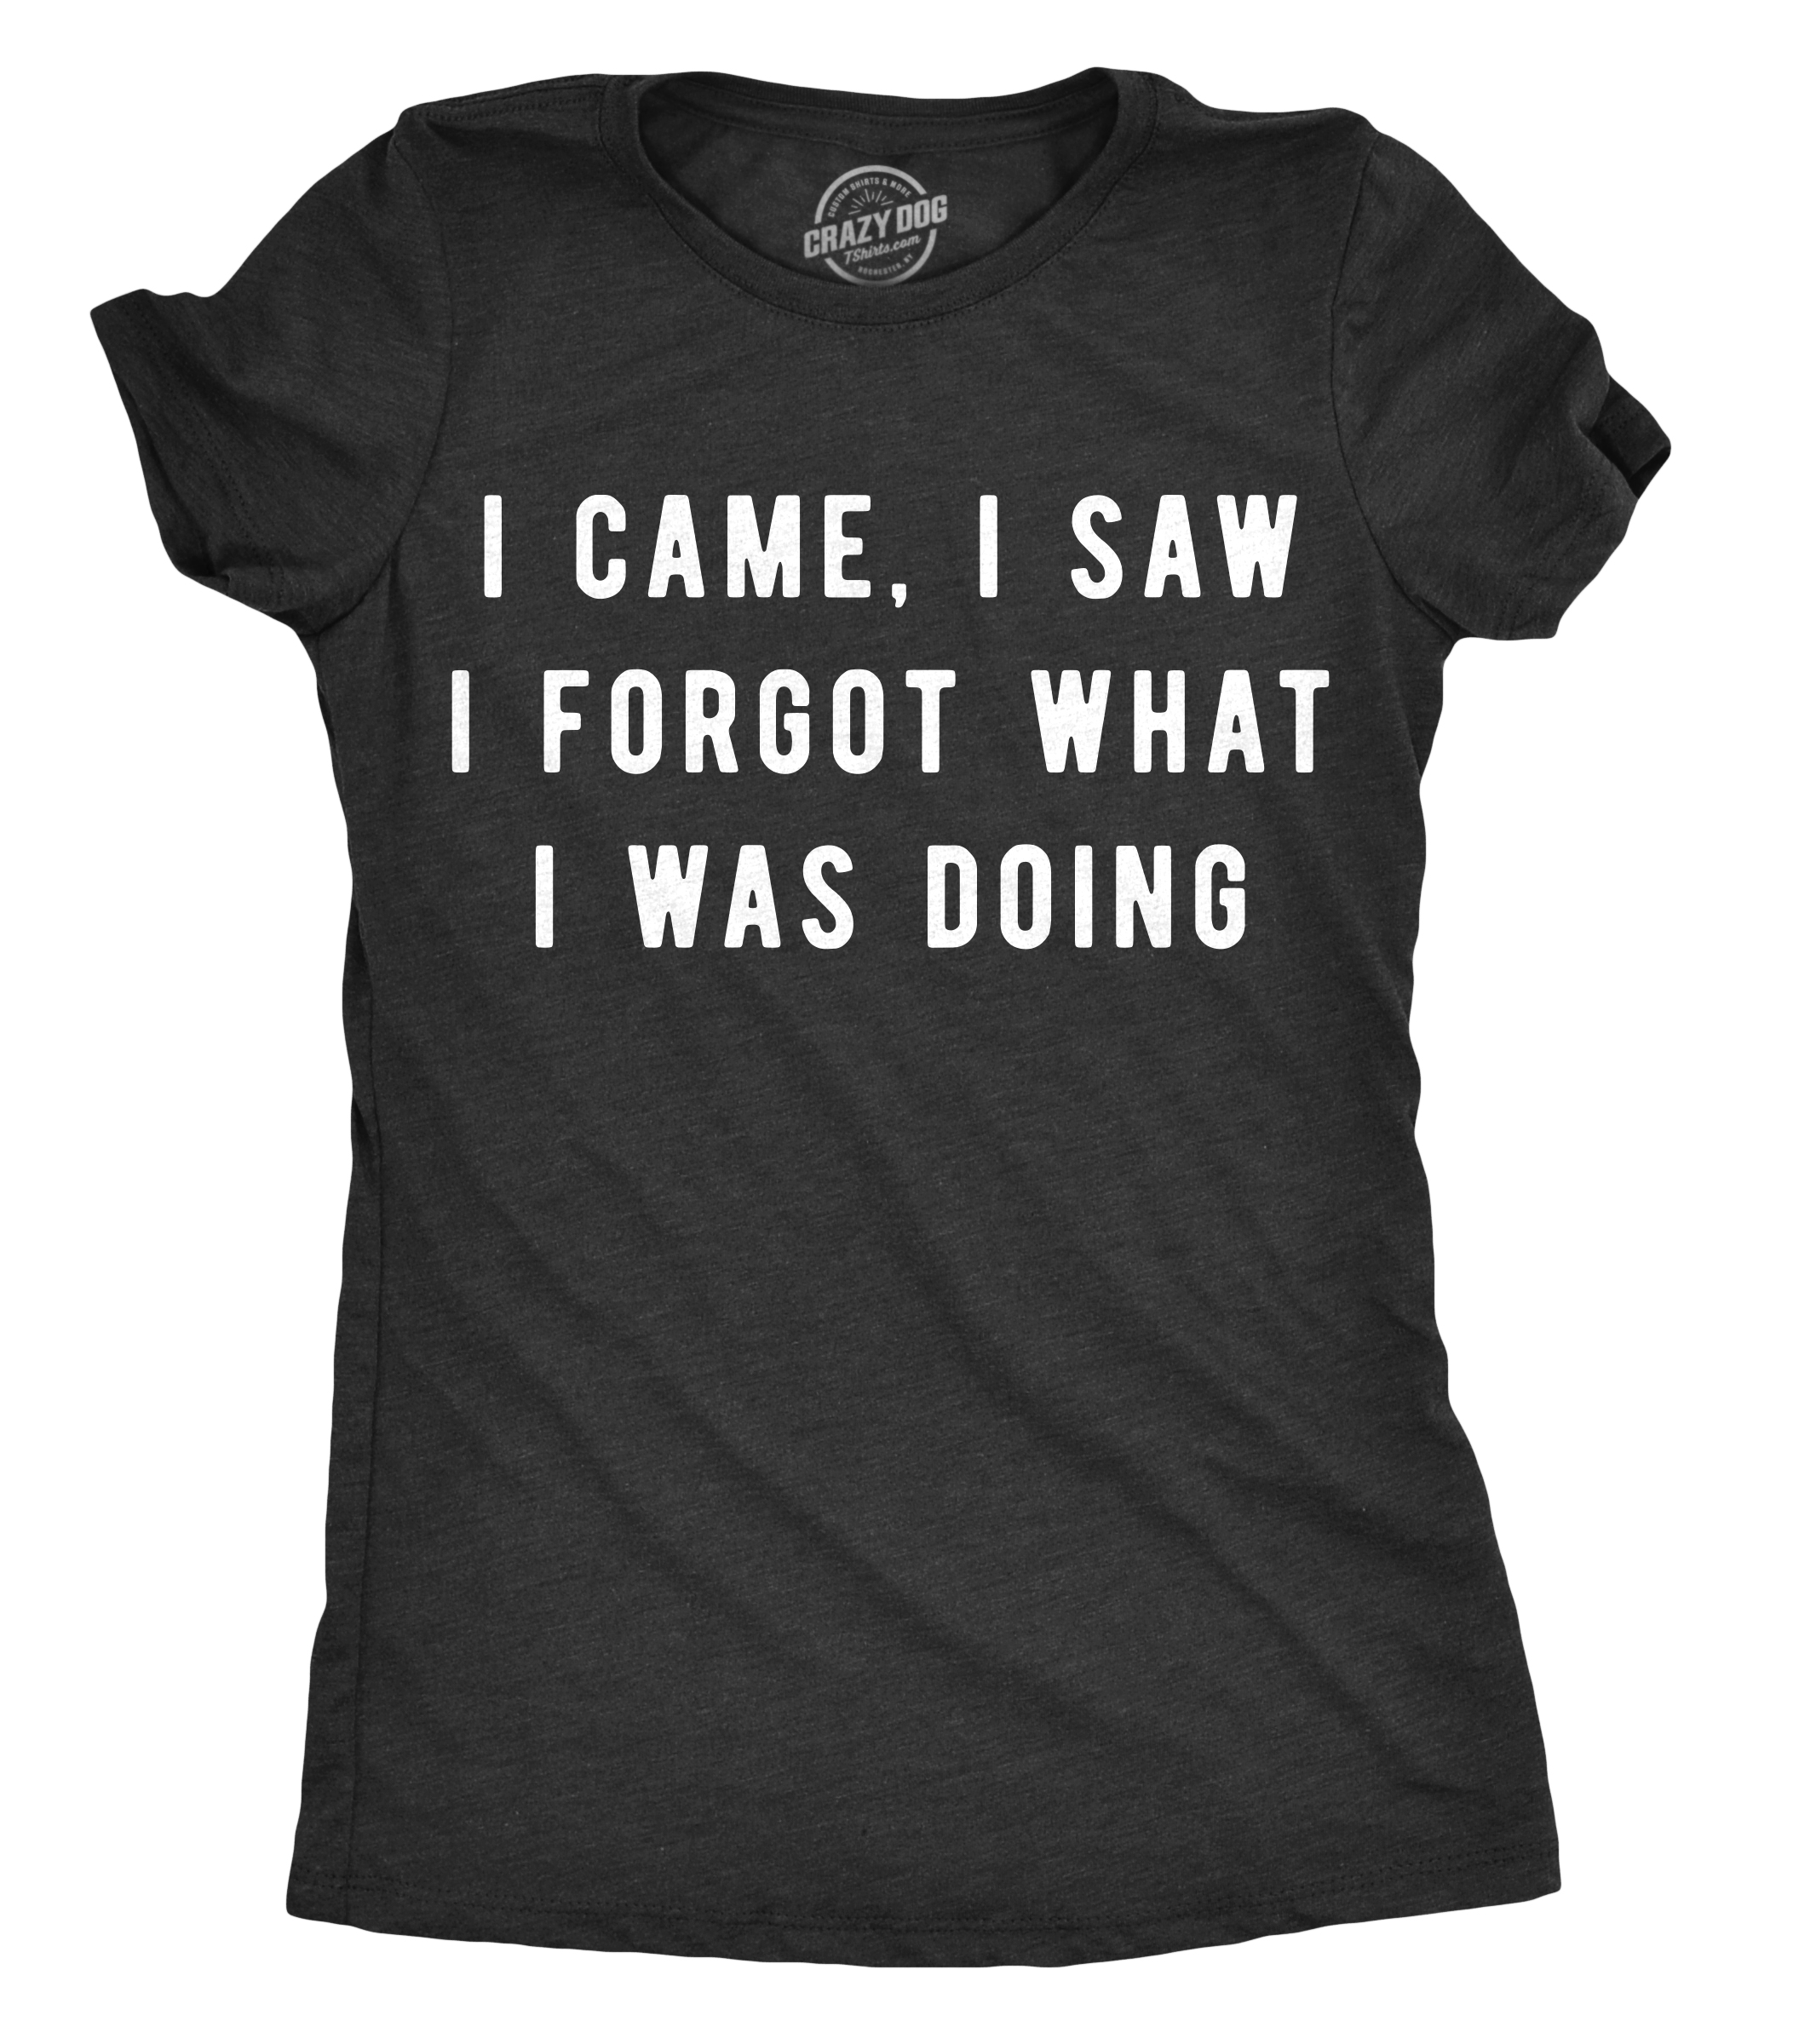 Crazy Dog Tshirts Womens I Came I Saw I Forgot What I Was Doing Tshirt Funny Sarcastic Tee For Ladies